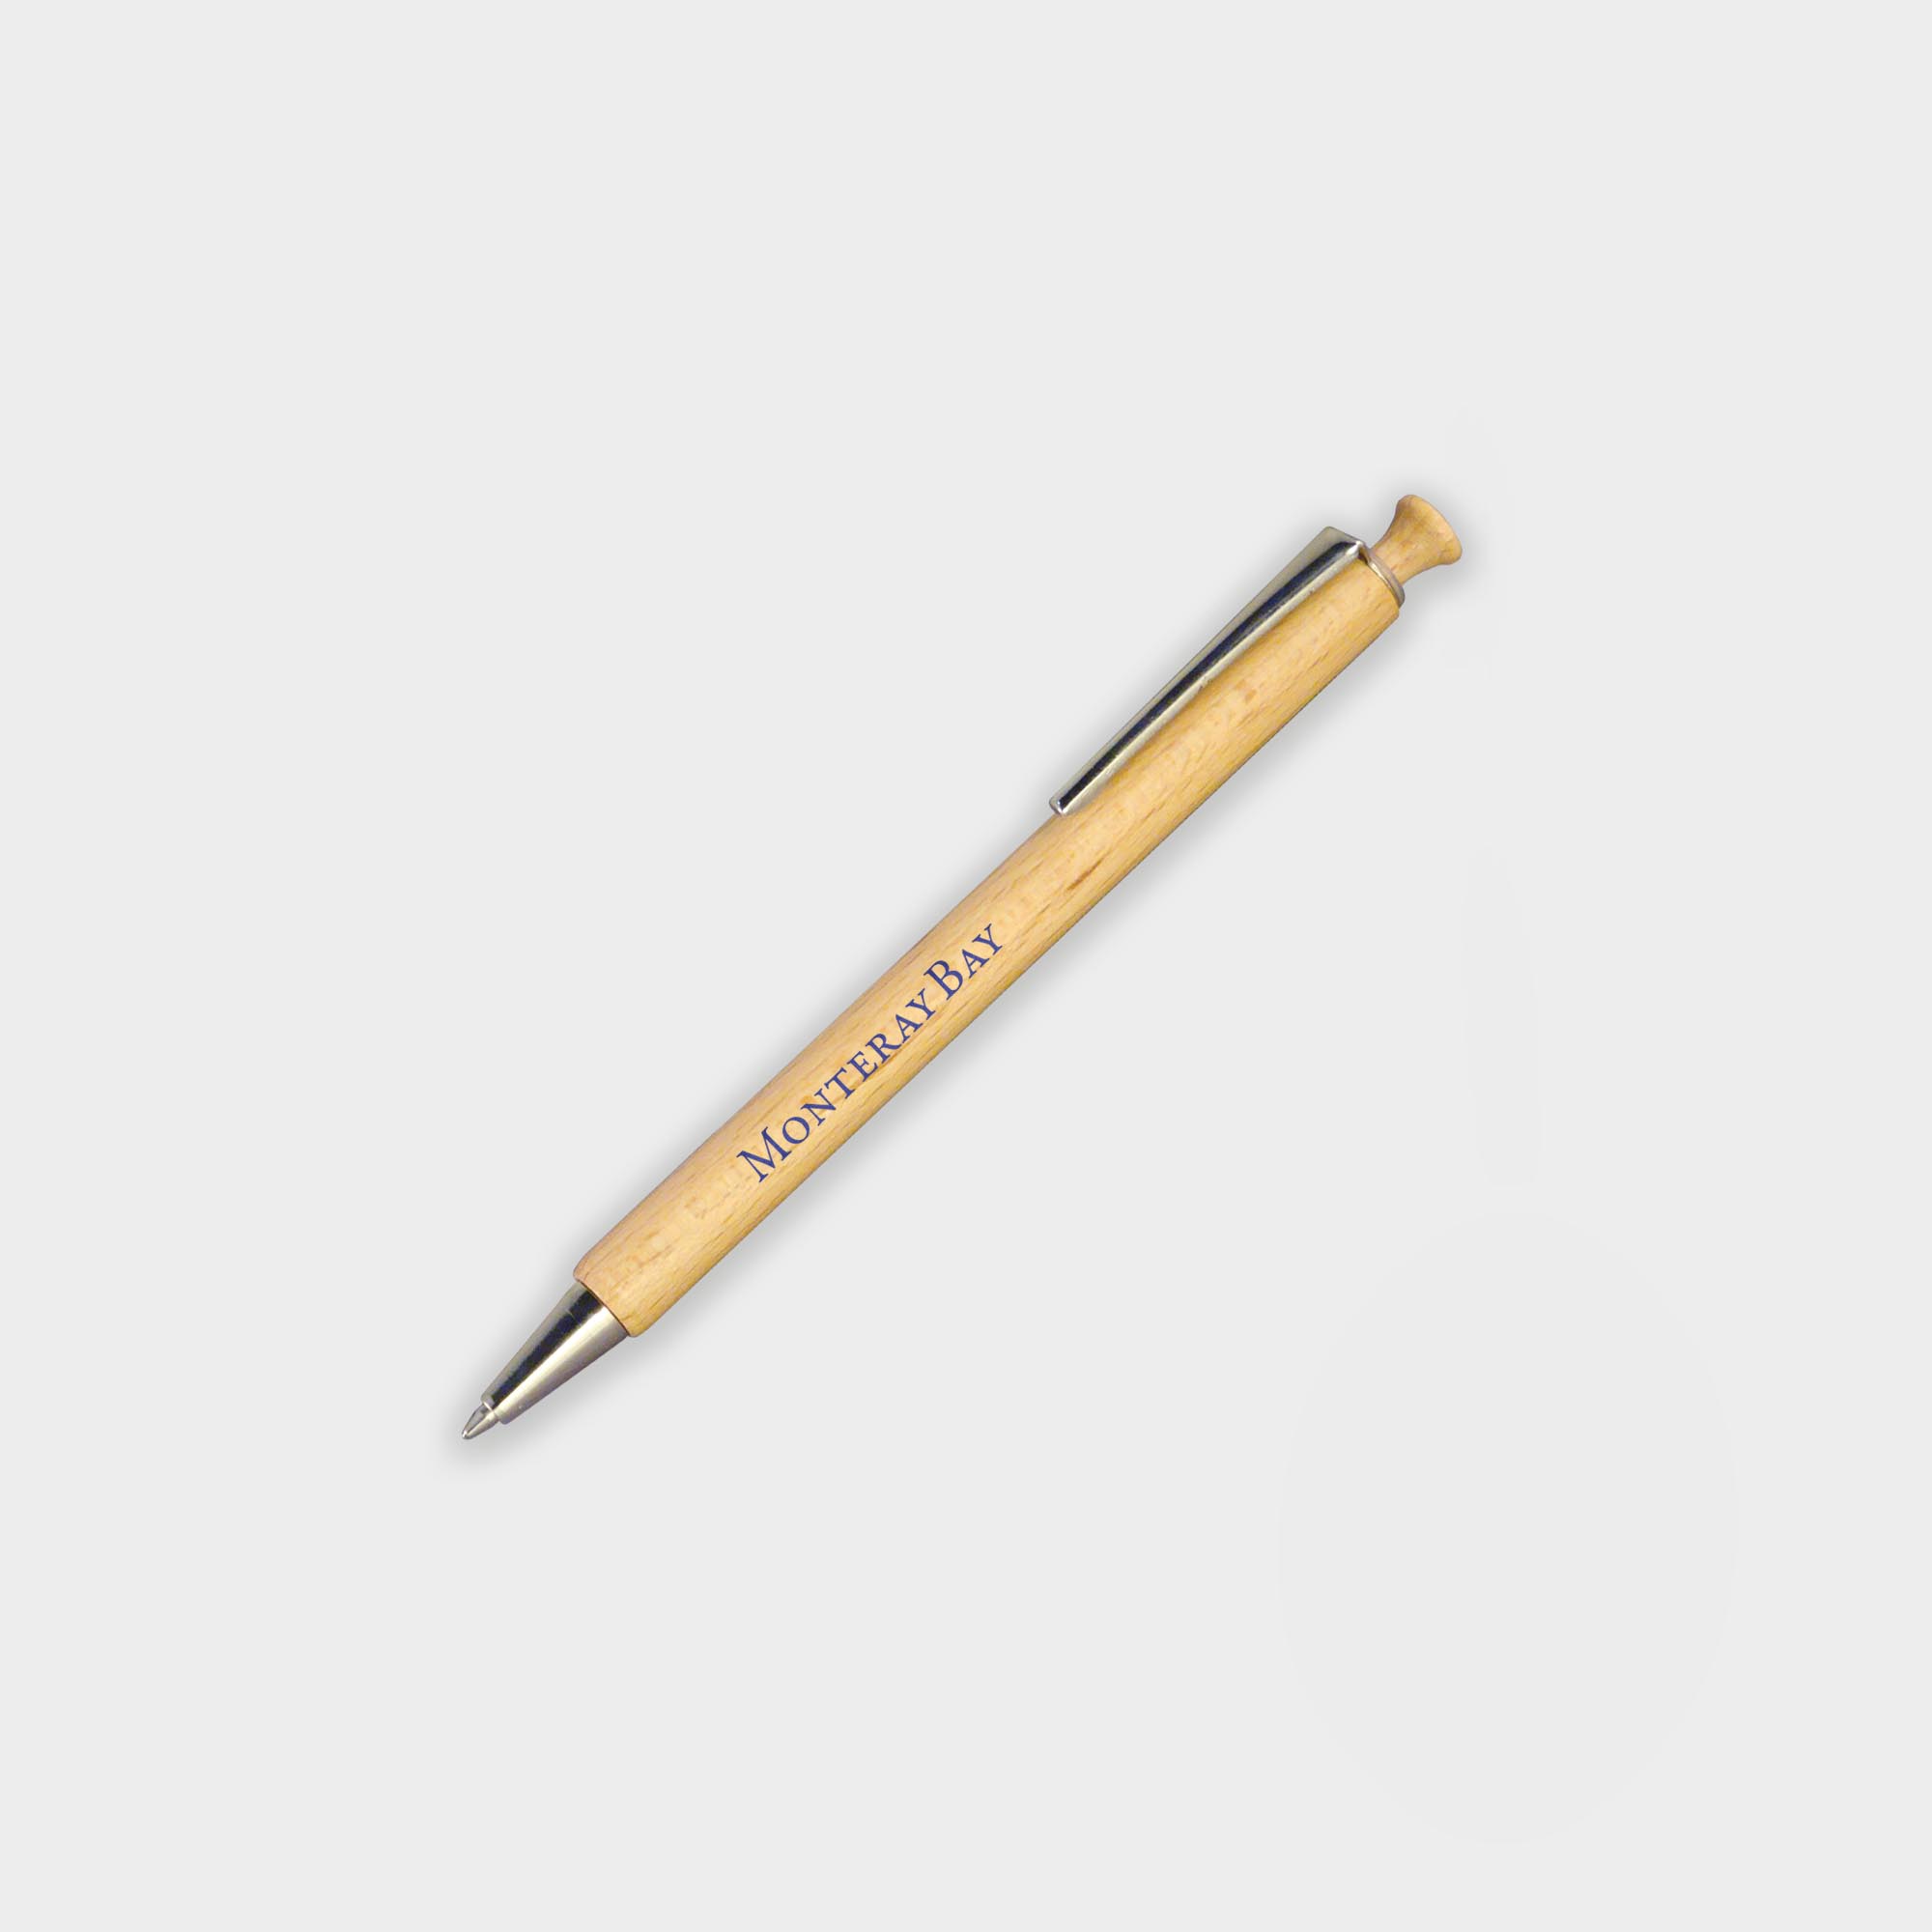 The Green & Good Albero Pen from sustainable wood. Executive Pen - retractable with a natural wood finish and chrome trim. Made from sustainable beech. Blue ink as standard. Optional black ink.